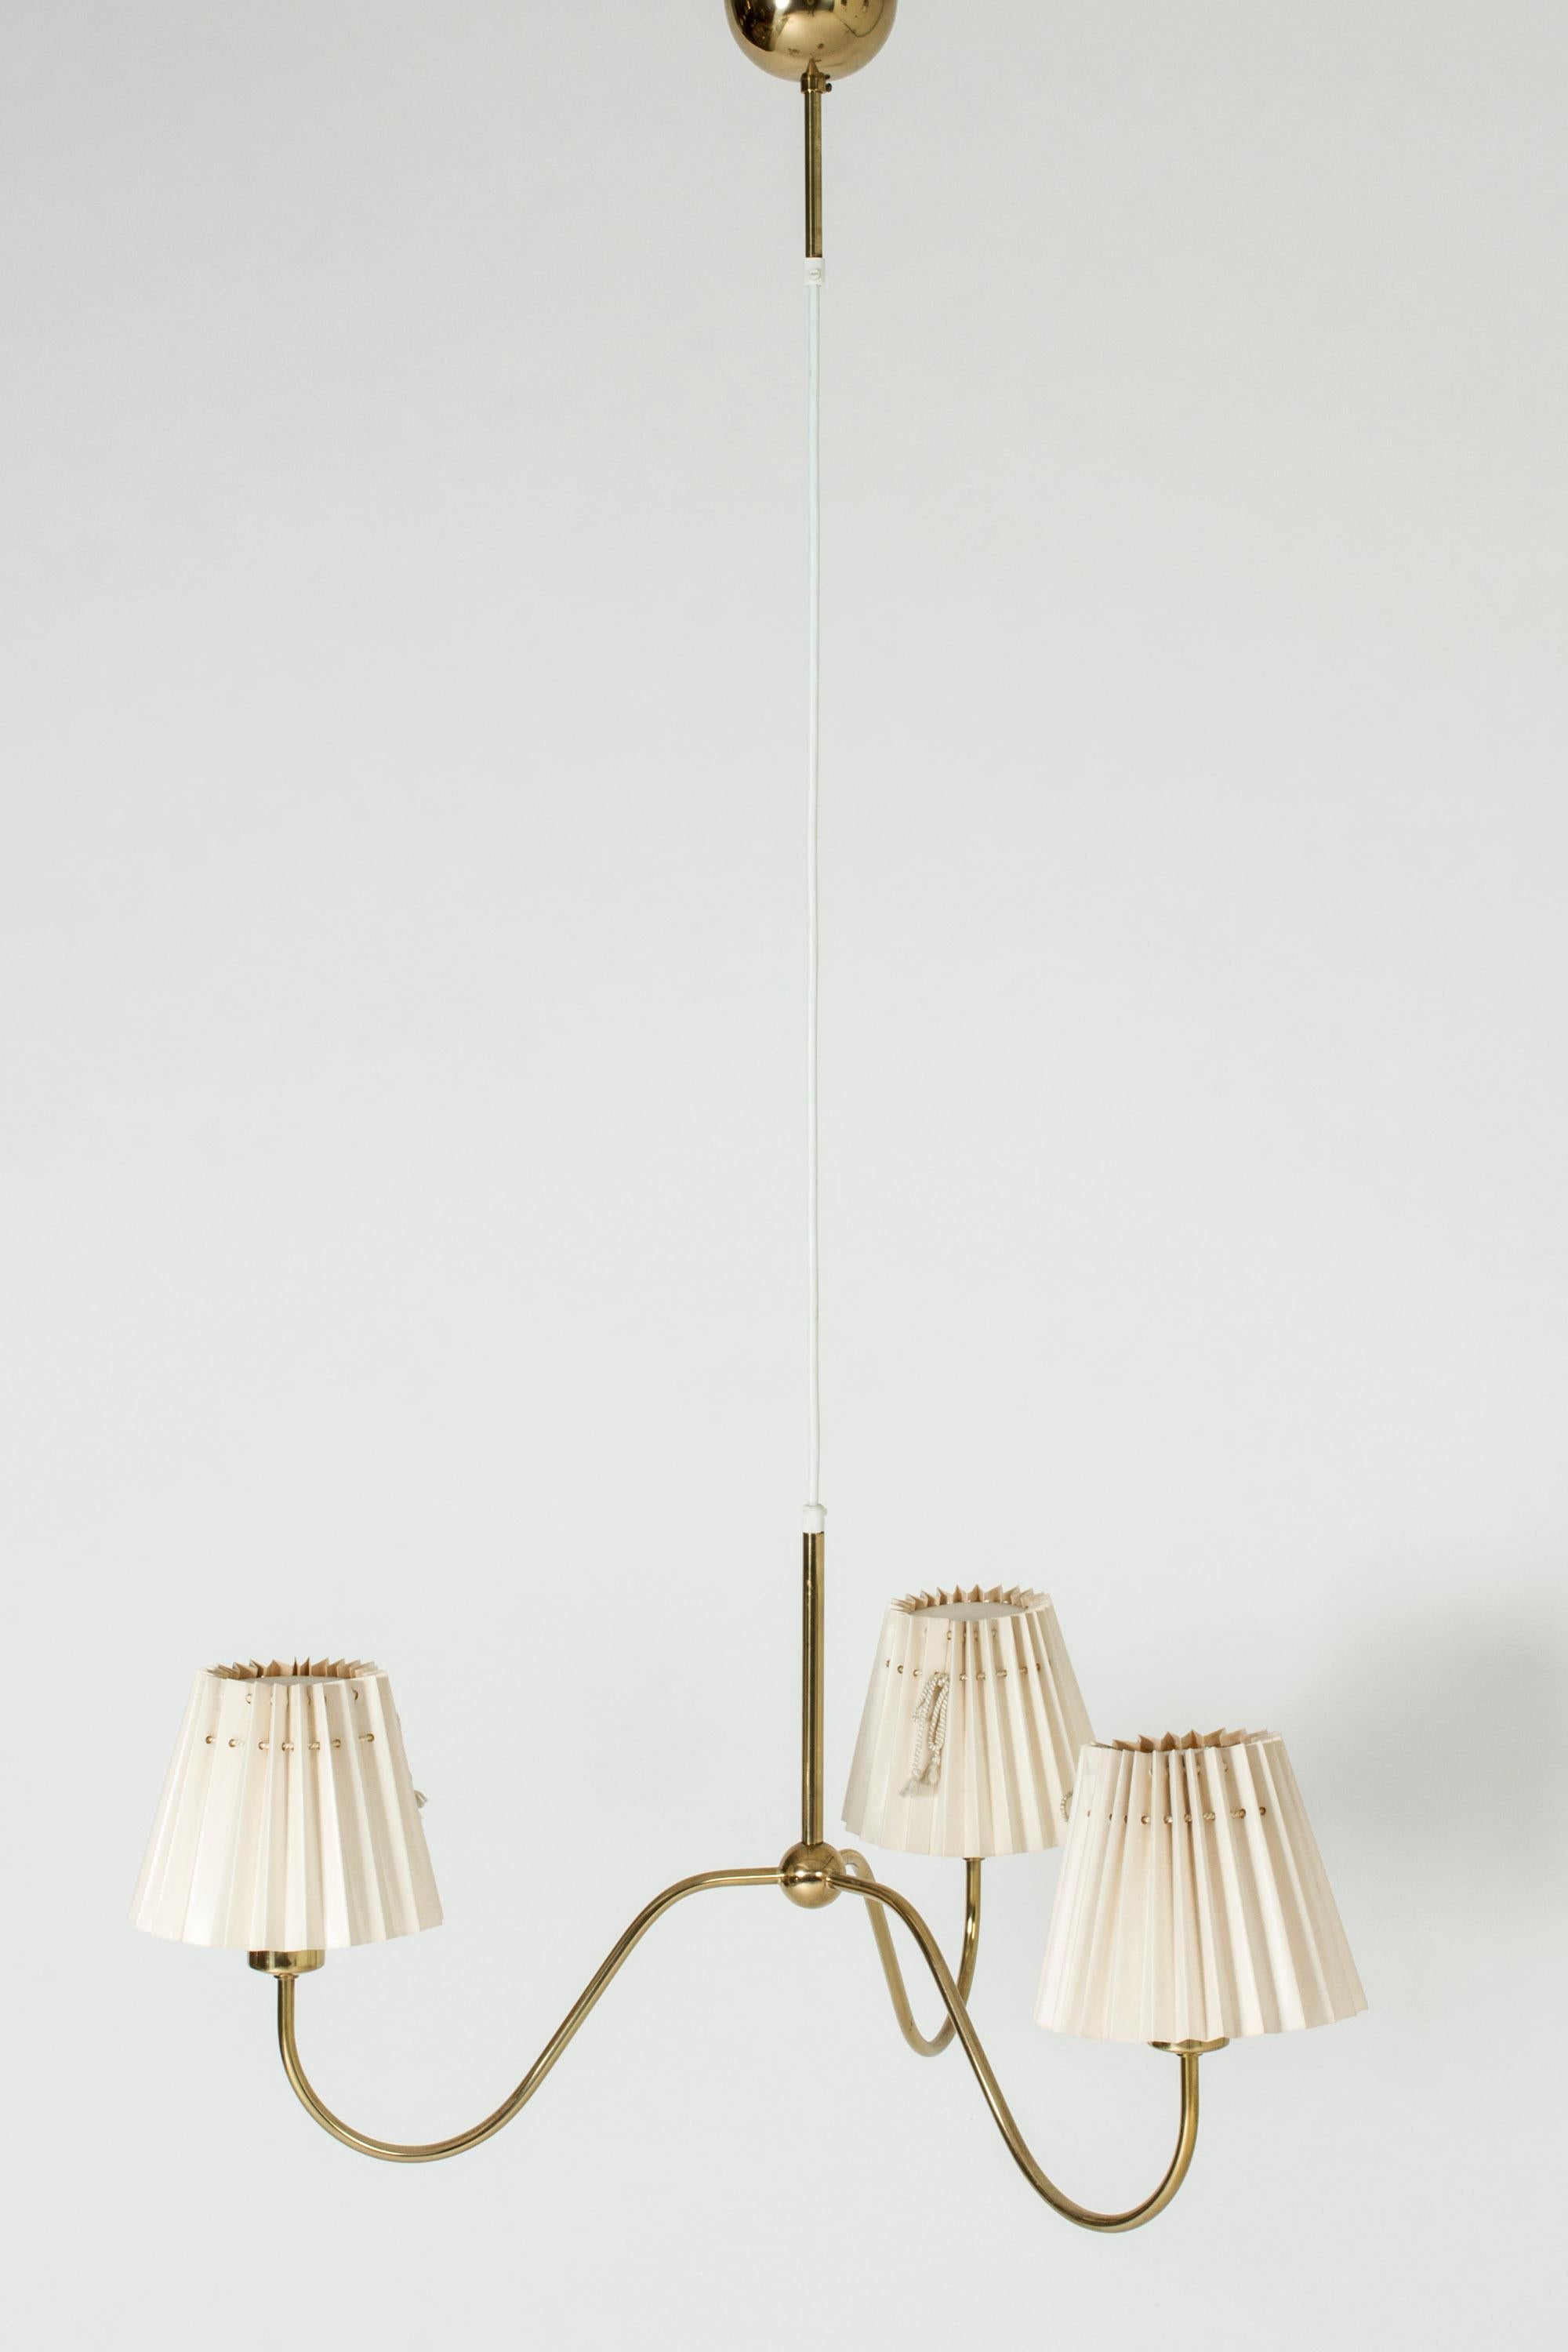 Three-armed chandelier by Josef Frank, made from brass. Wide, elegant design with a decorative ball at the center of the undulating arms. Original shades in good condition.